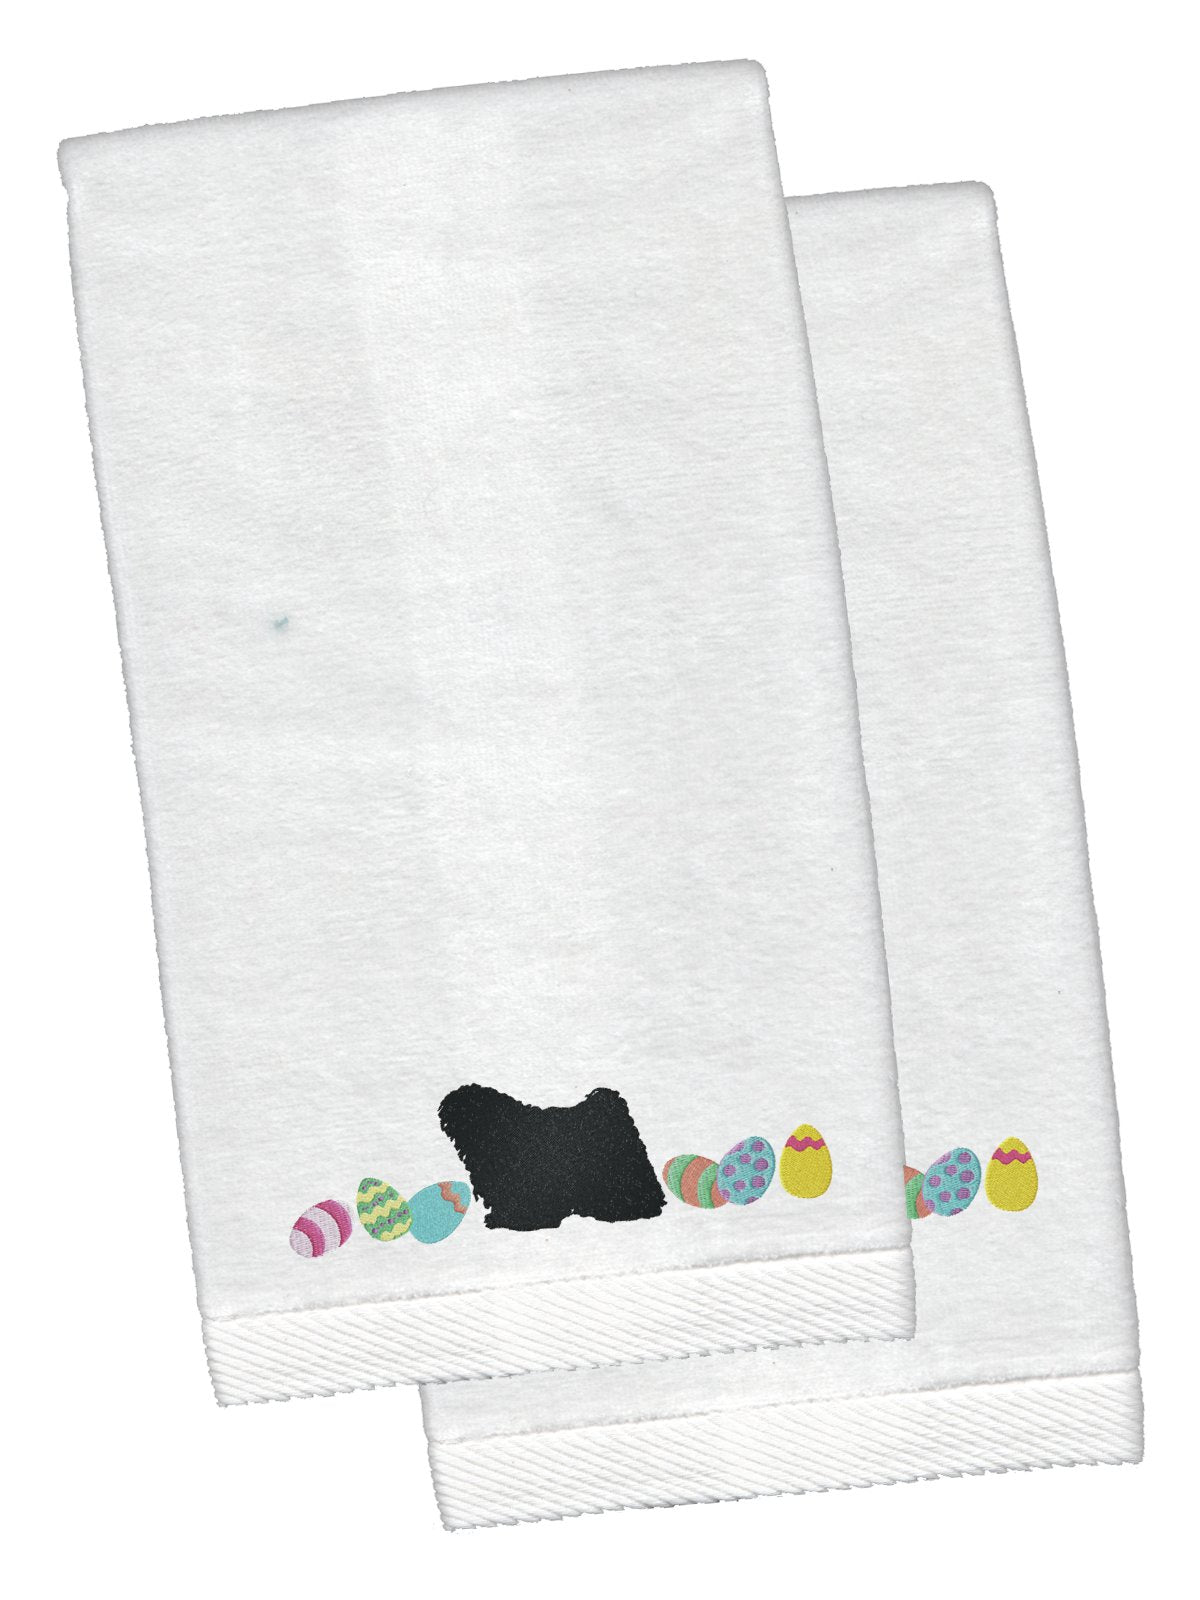 Puli Easter White Embroidered Plush Hand Towel Set of 2 CK1676KTEMB by Caroline's Treasures